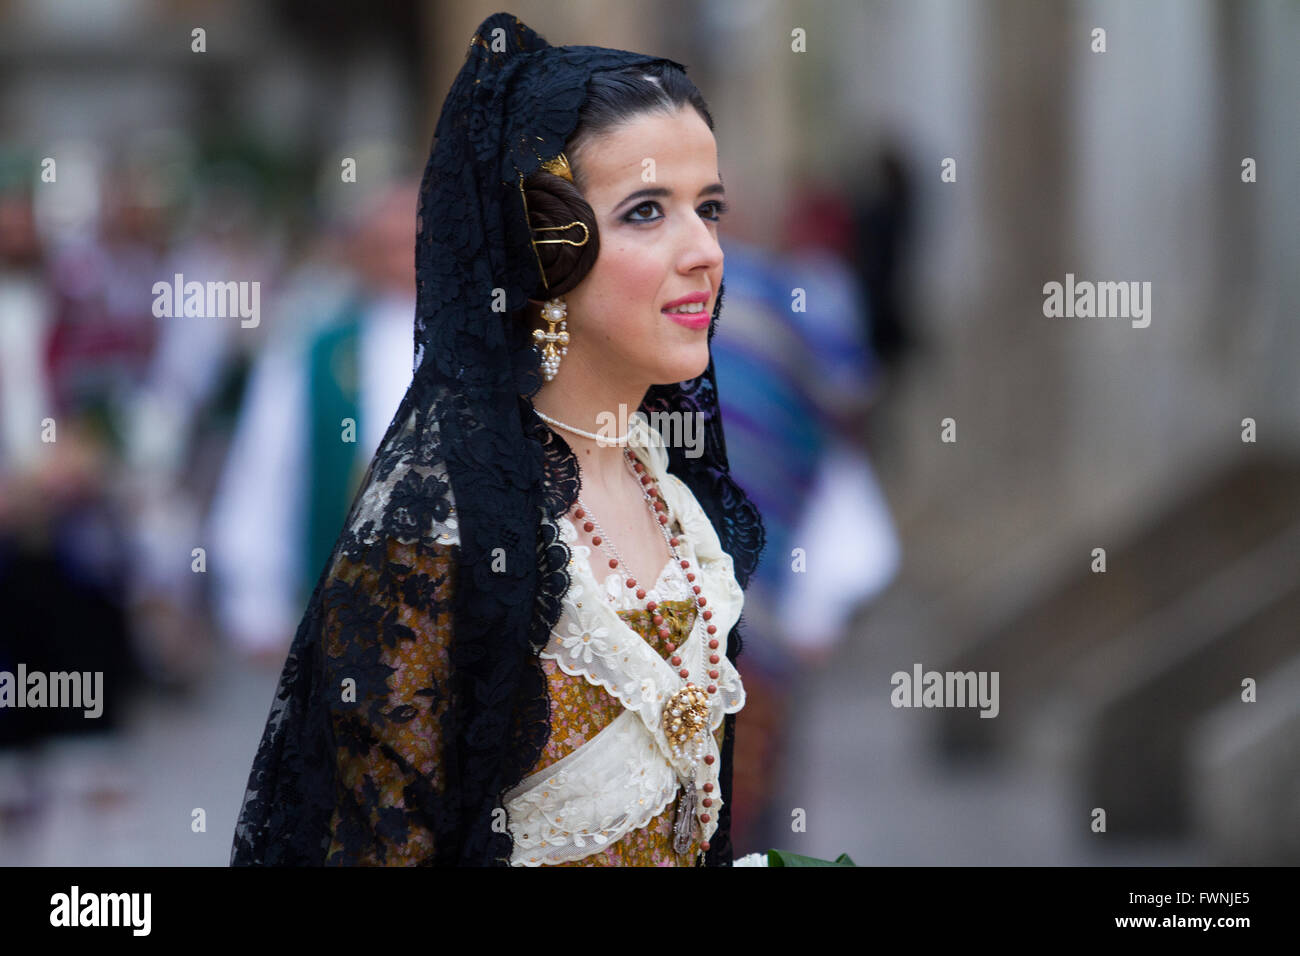 Woman dressed in traditional costume at the annual procession for  the offerings to the Lady of the Forsaken Valencia Spain Stock Photo